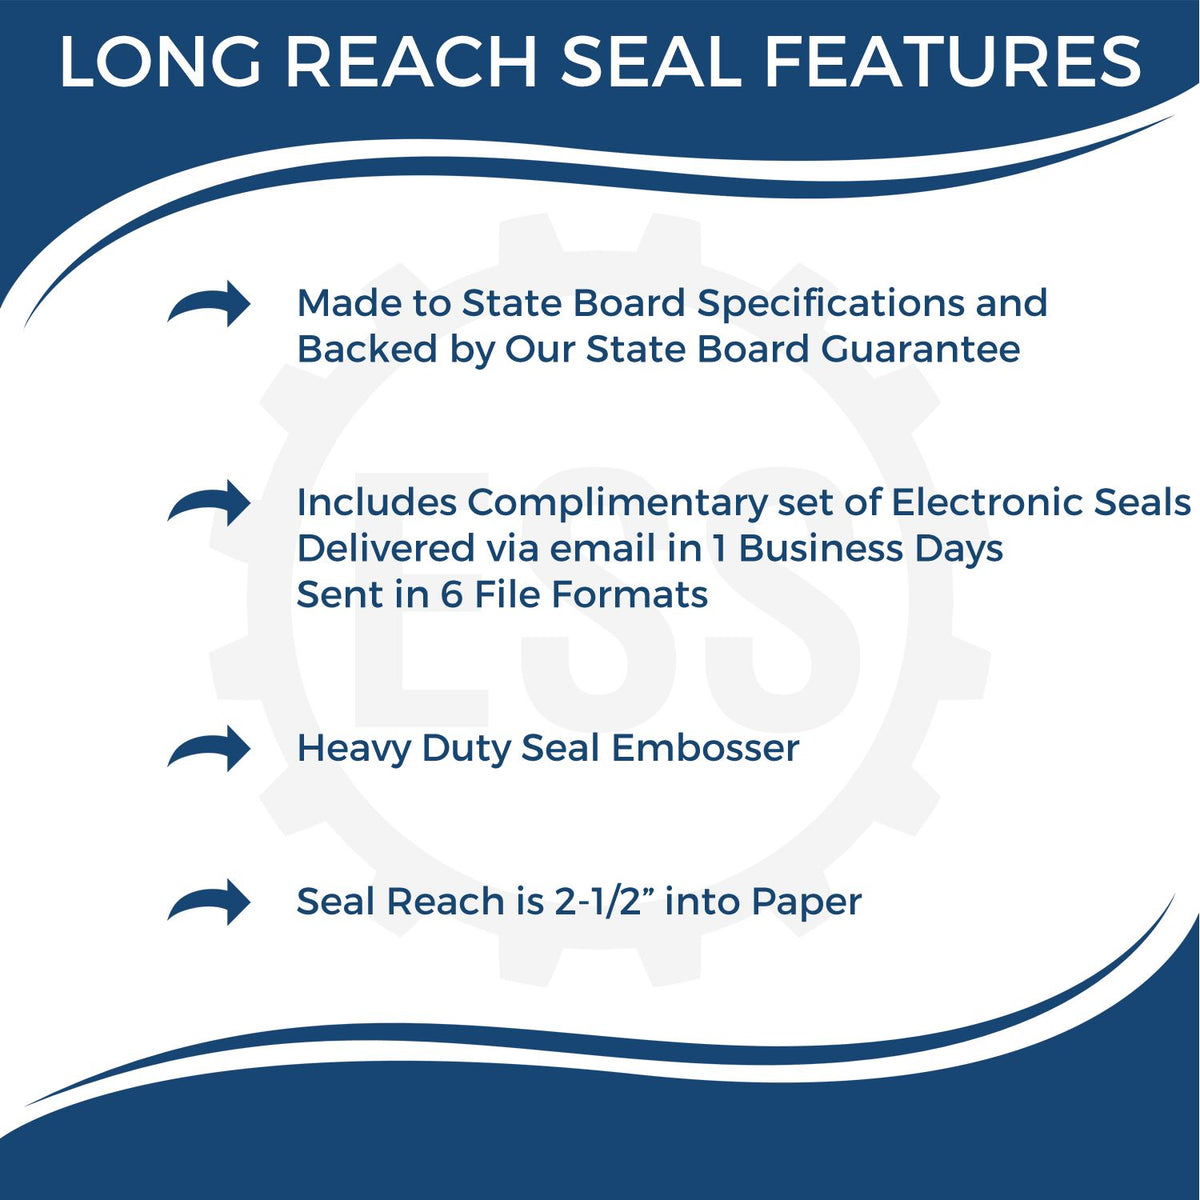 A picture of an infographic highlighting the selling points for the Long Reach Arizona PE Seal